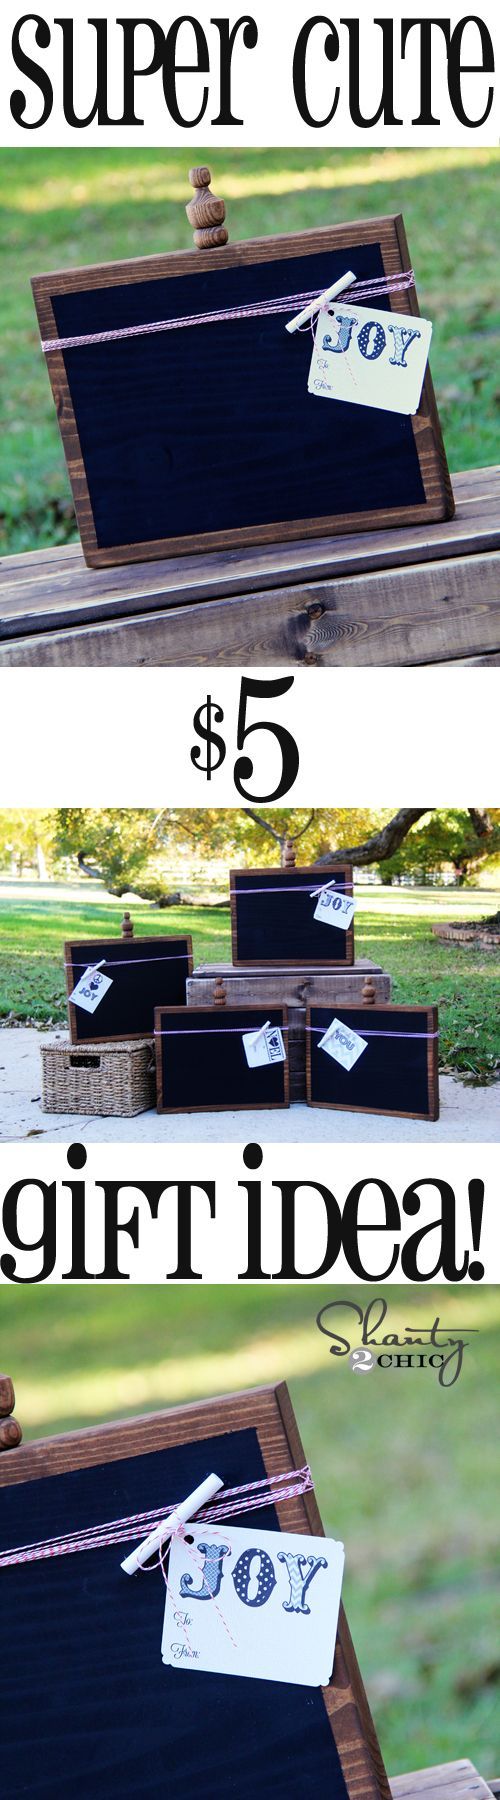 DIY #Christmas Gift Idea at Shanty-2-Chic.com // Perfect #gift for teachers, fam...